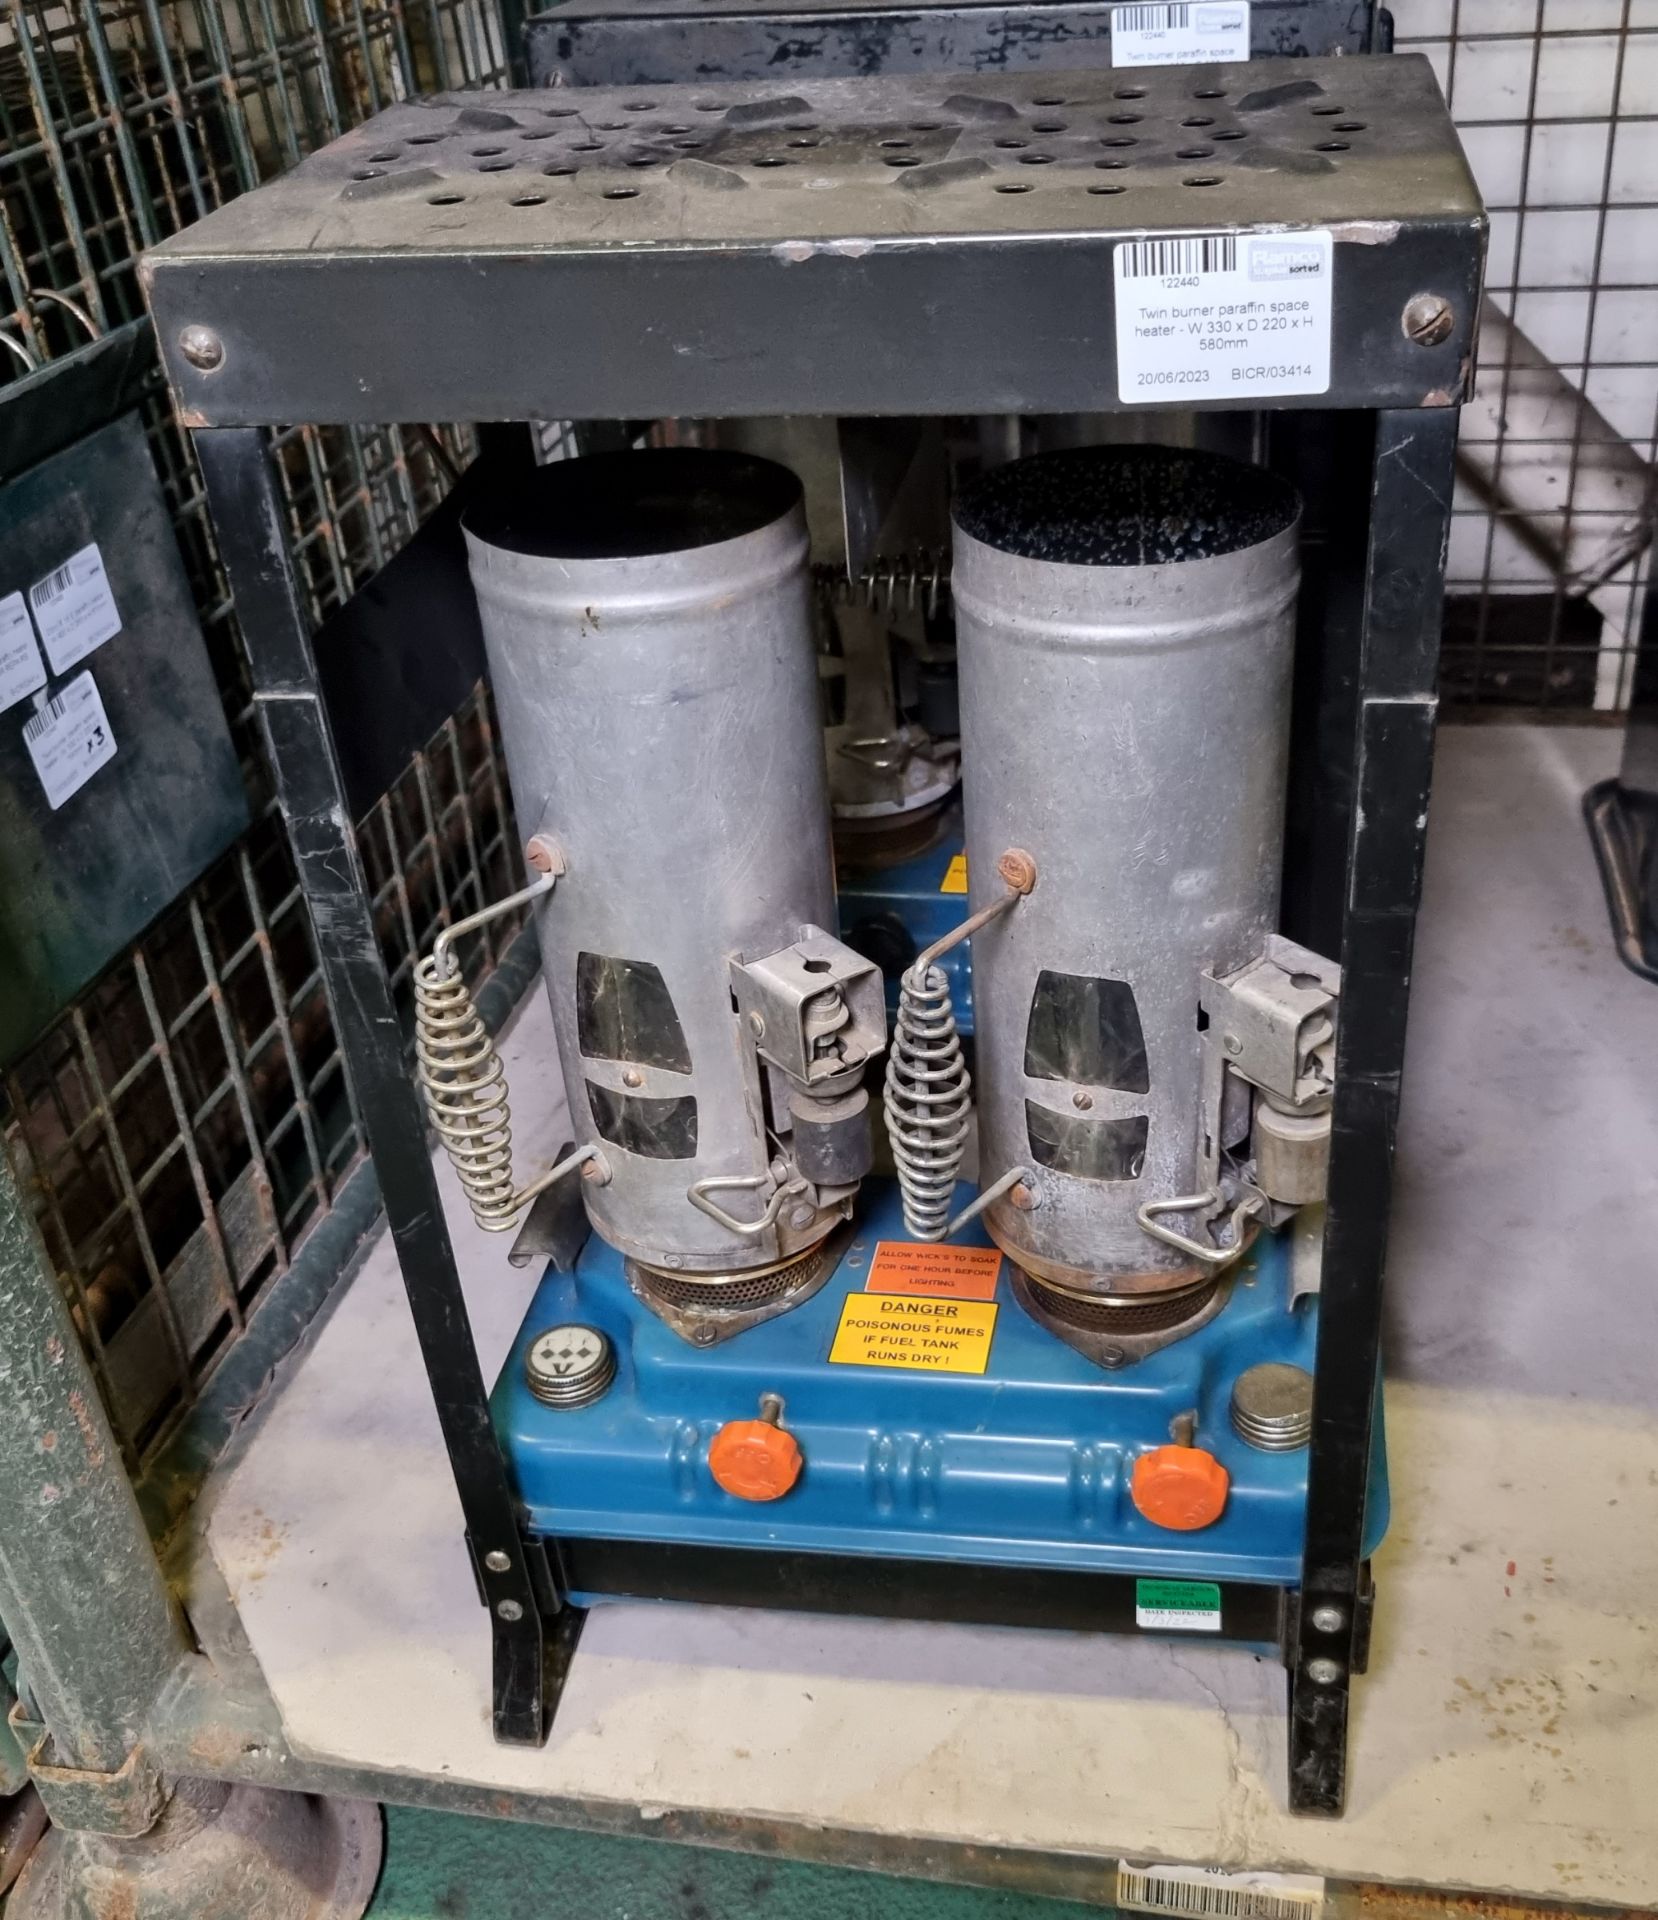 Zibro RS-29 paraffin heater - SPARES OR REPAIRS, 3x Twin burner paraffin space heaters - W 330 - Image 3 of 5